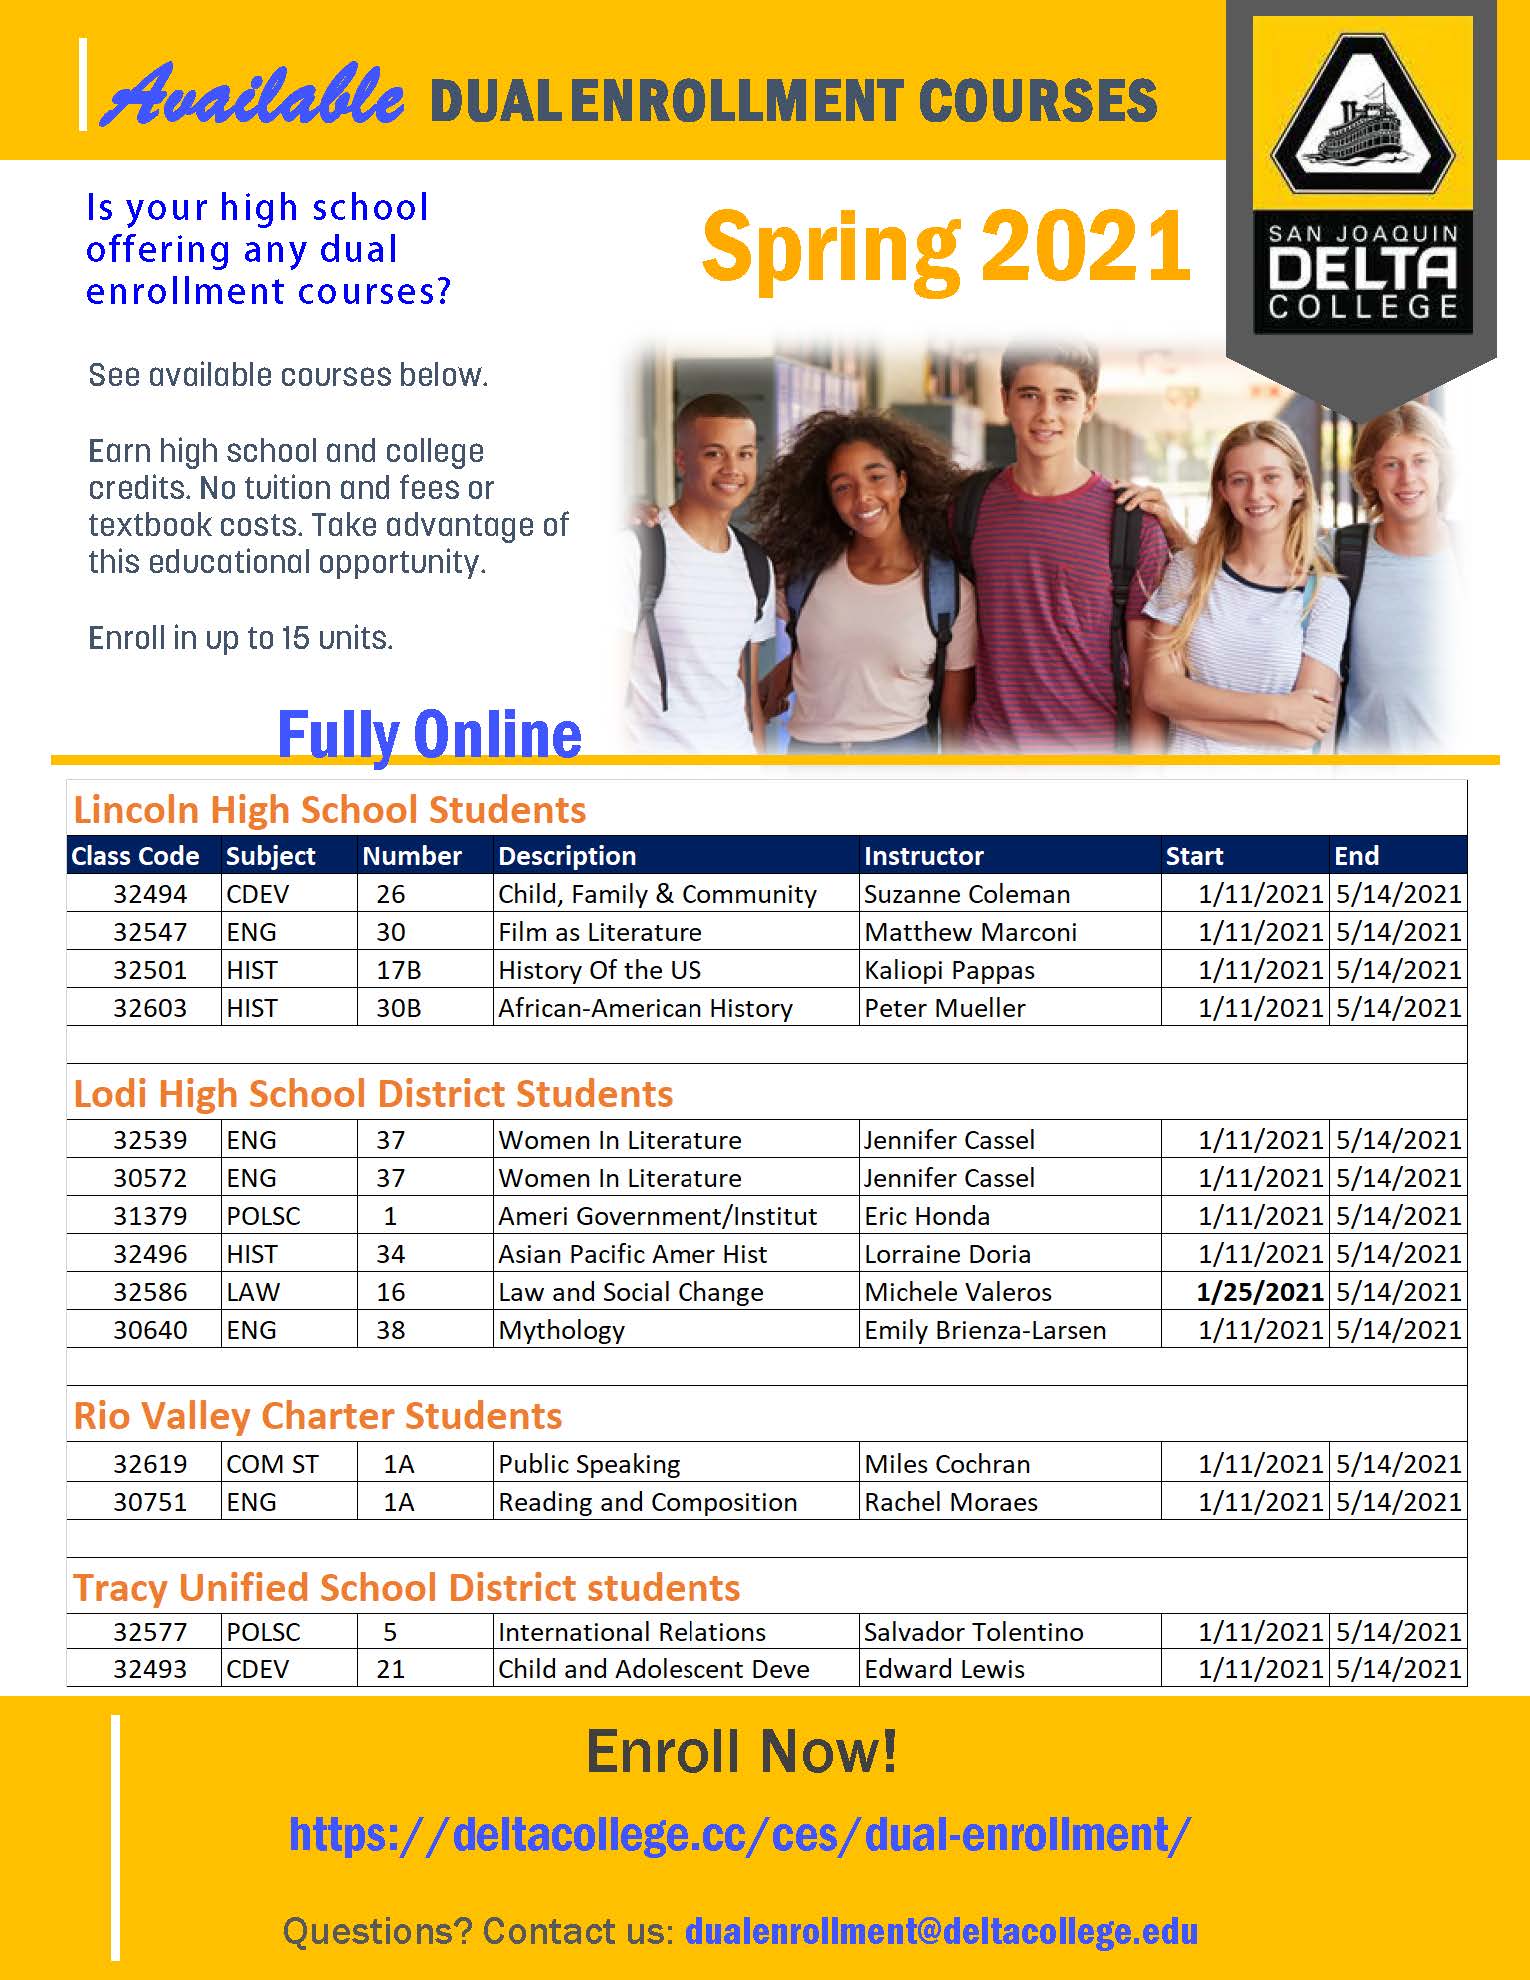 Dual enrollment courses available at other schools